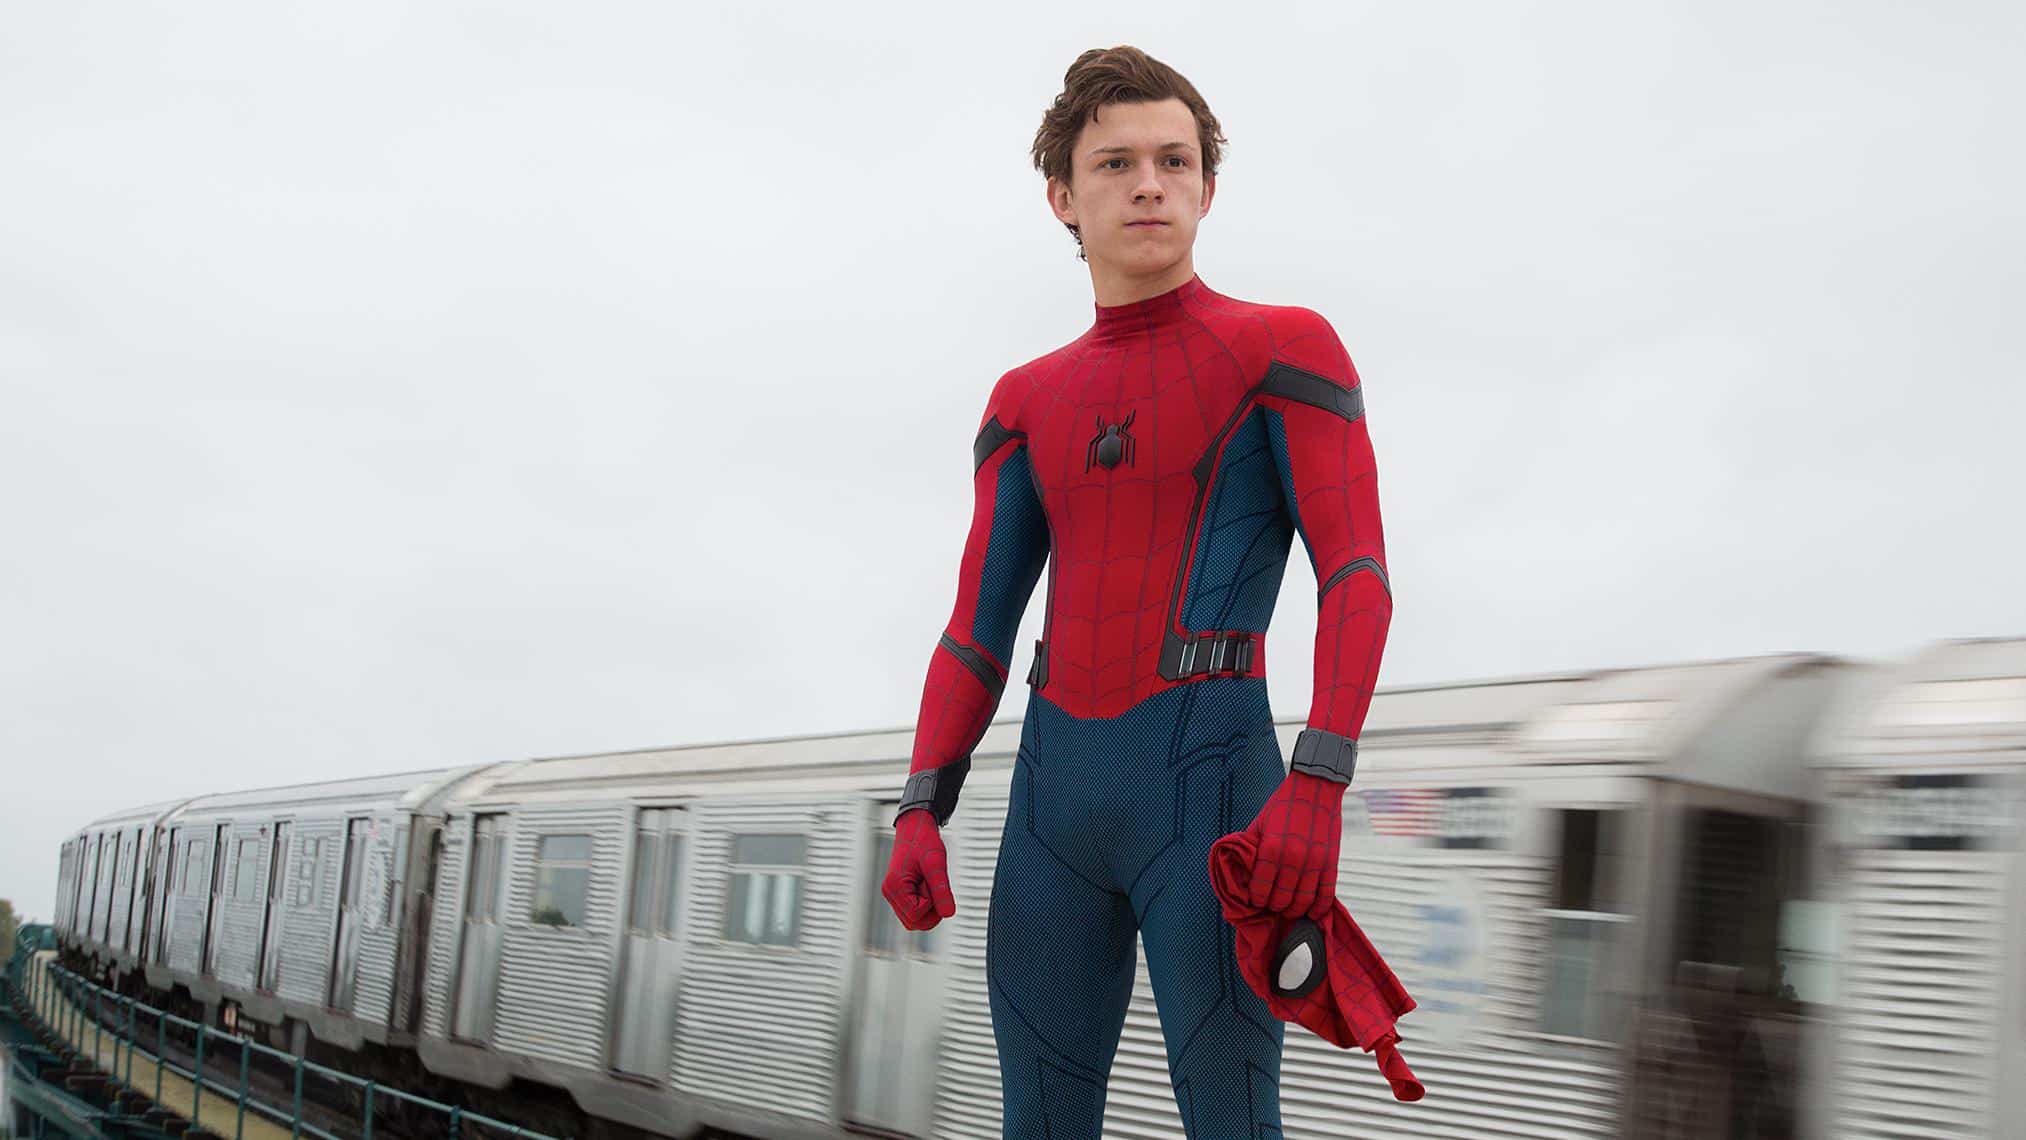 peter-parker-stands-by-a-train-in-marvel-cinematic-universe-phase-3-movie-spider-man-homecoming